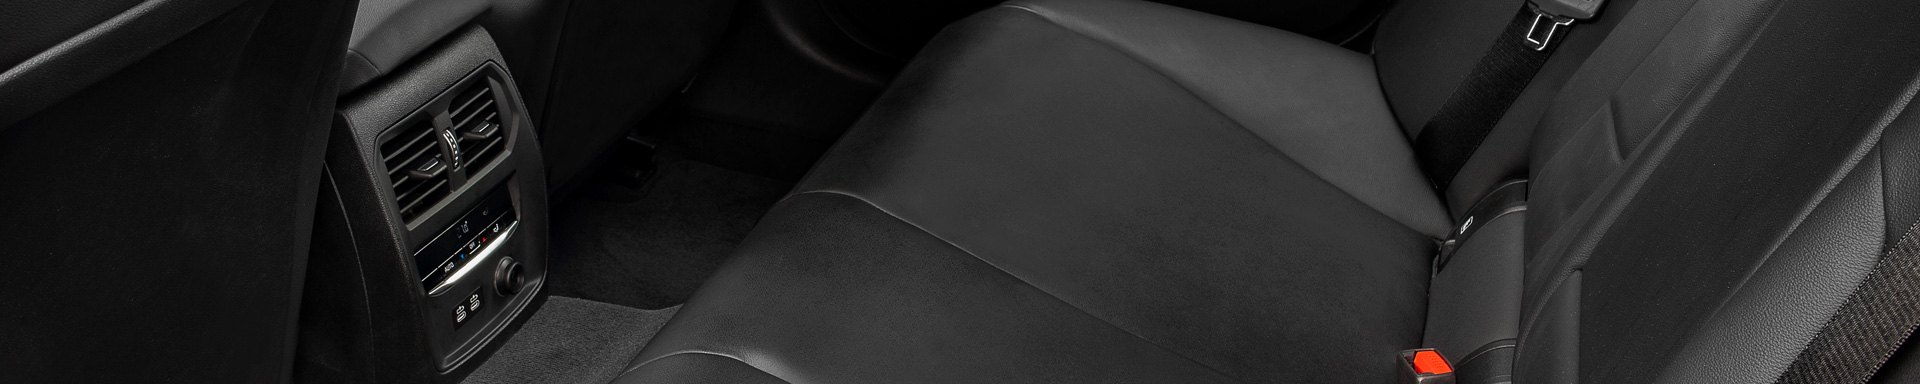 New LineUp Of Coverking Custom-Tailored Seat Covers For 2021 BMW 3-Series Is Here! 